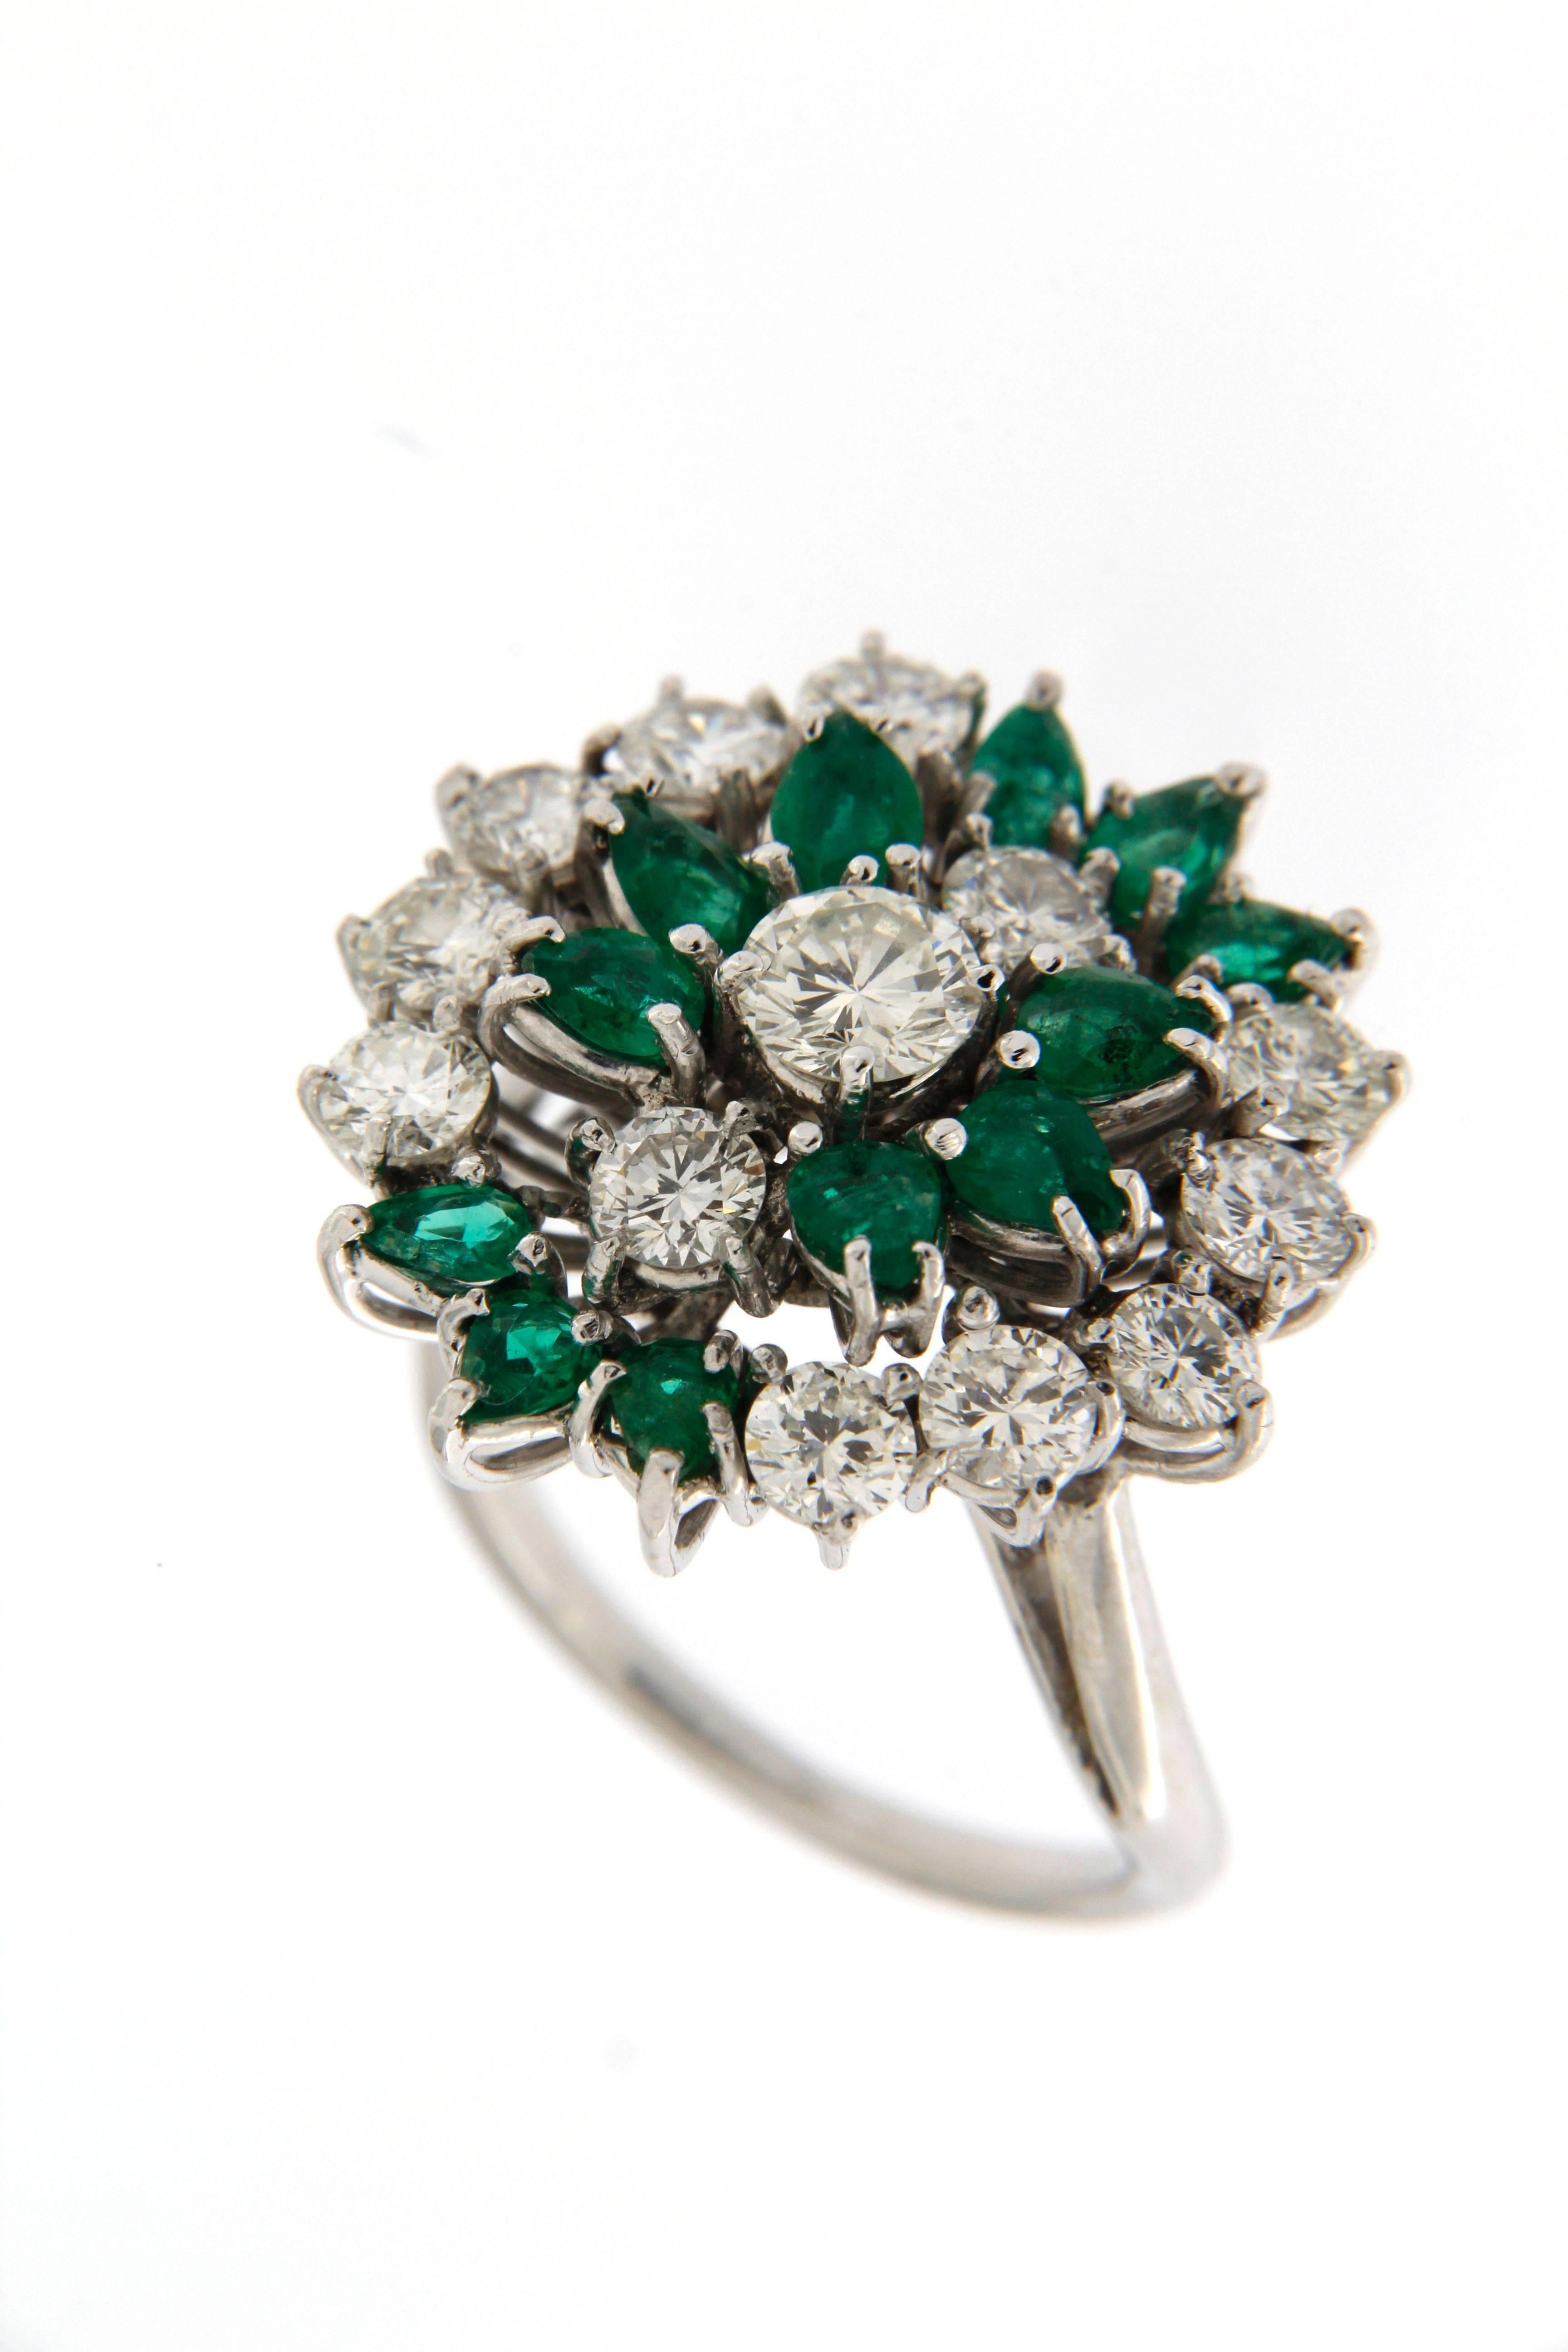 Original Italian jewelry dated 1960, with beautifull Columbia Emeralds
central diamond ct. 0,40
total weight other diamonds ct. 1.20
Columbia Emeralds total weight ct. 1.50
Size of the ring 13.5 - French size 53.50
the ring can be sized before